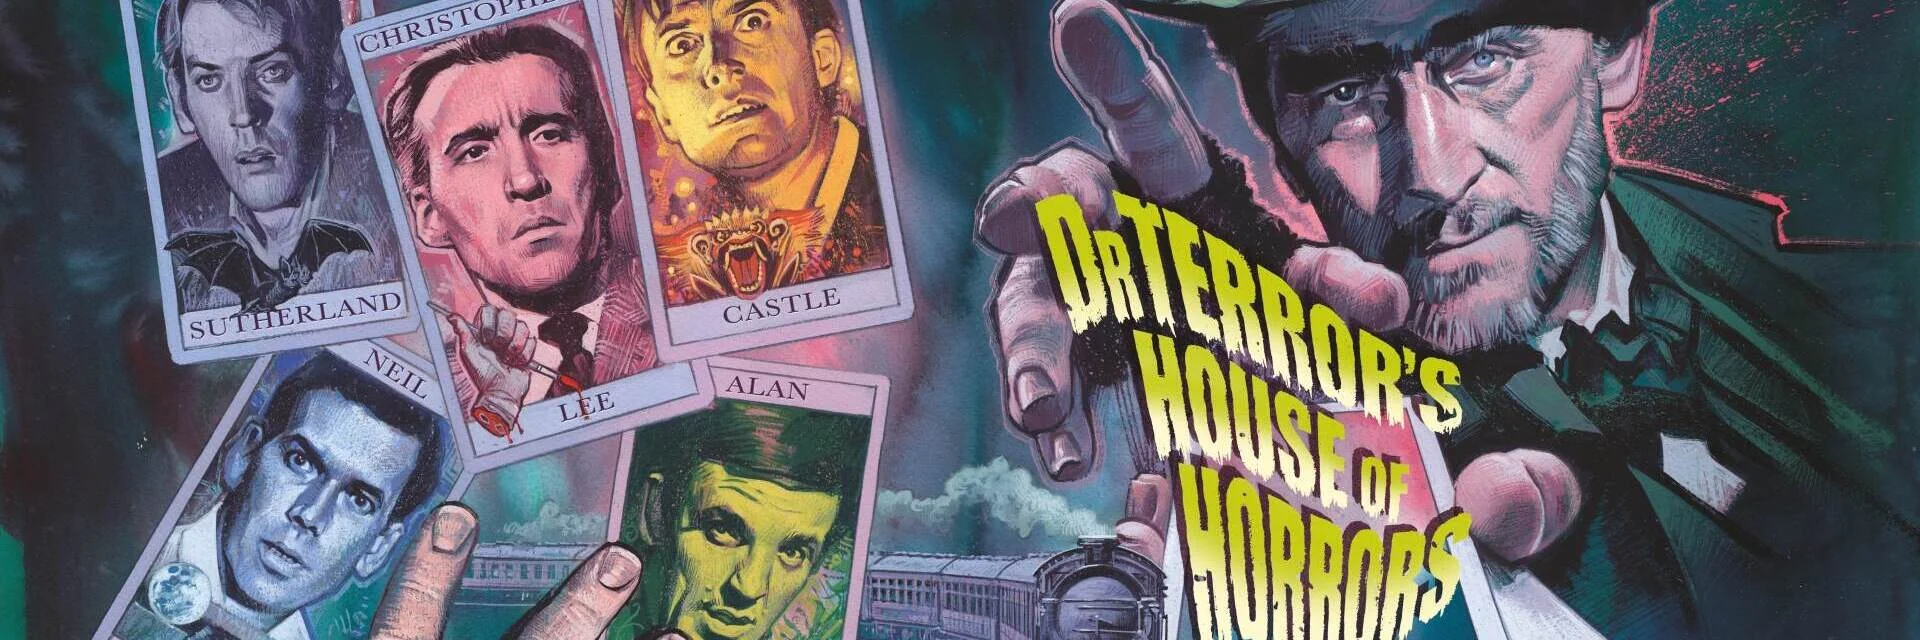 Dr. Terror's House of Horrors 4K 1965 big poster